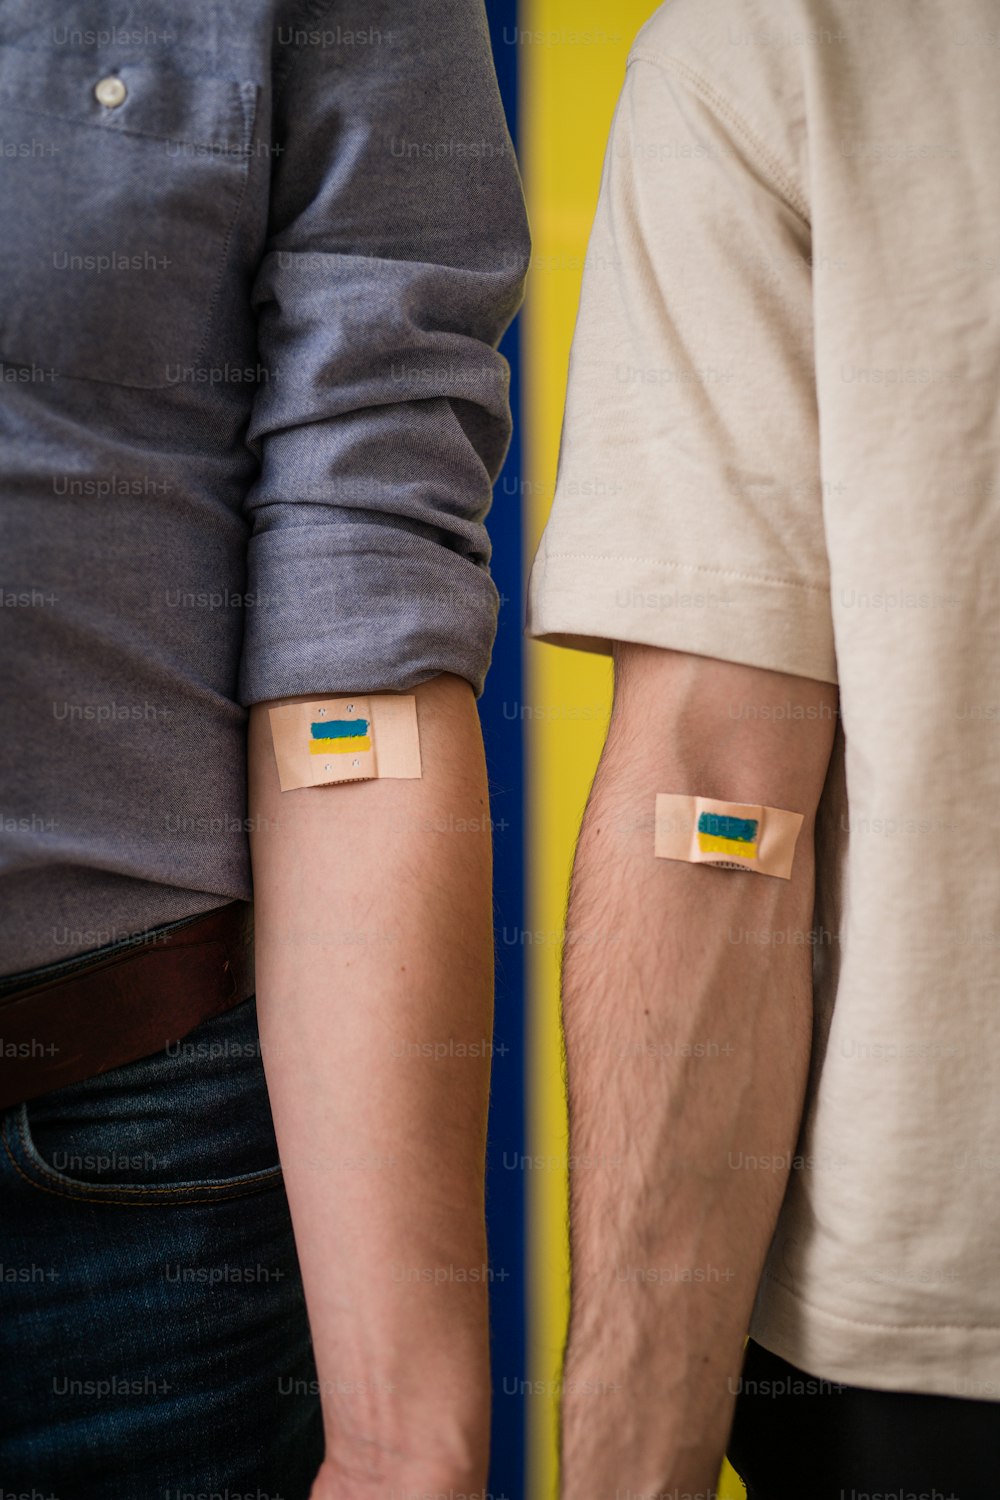 Blood donors with a bandage after giving blood on Ukrainian flag background.